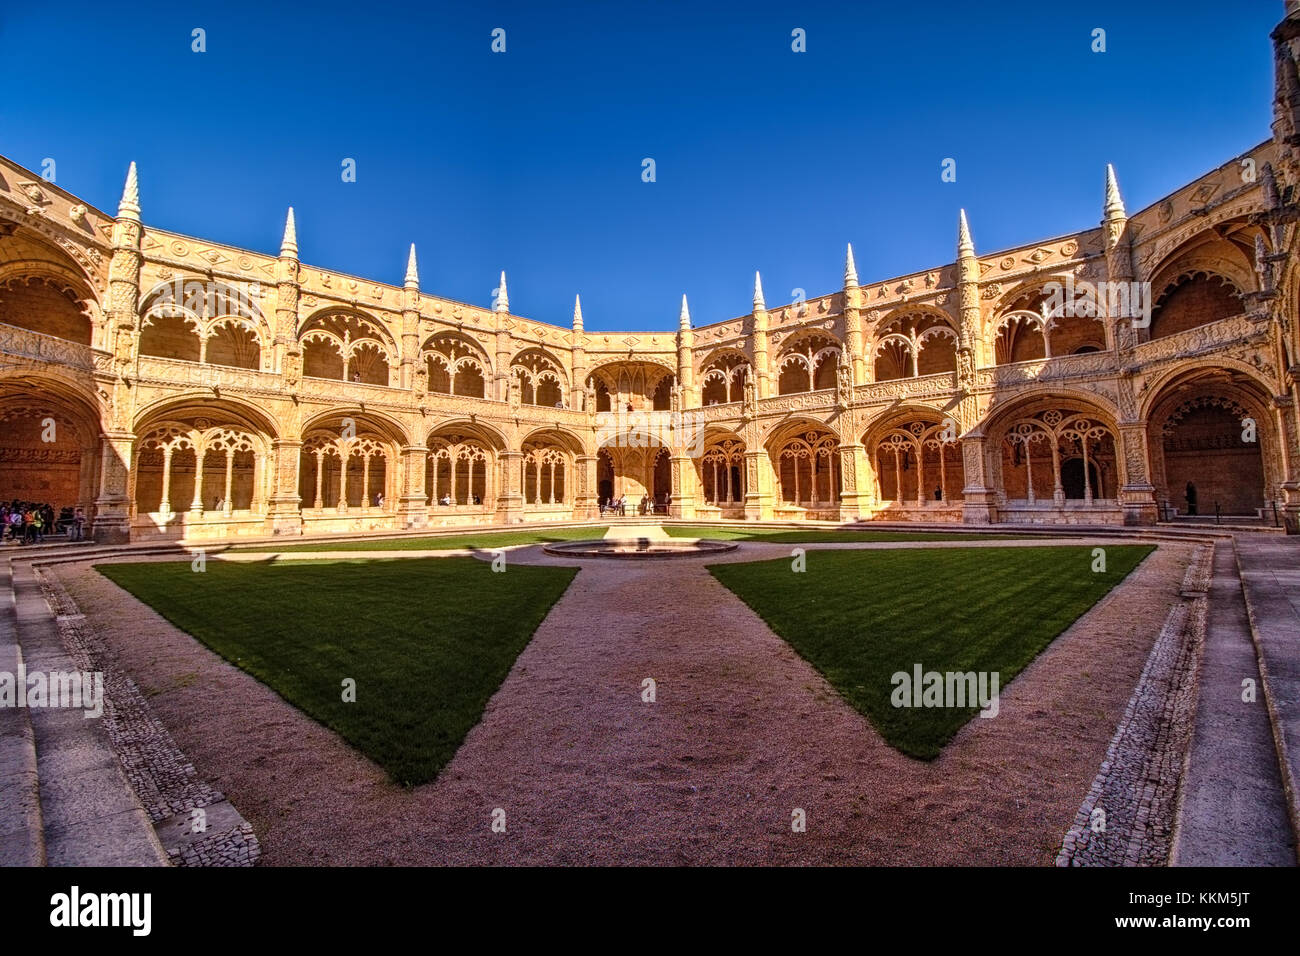 The cloisters in Jeronimos Monastery in Lisbon, Portugal, showing the characteristic detailed carvings of Manueline architecture. Stock Photo